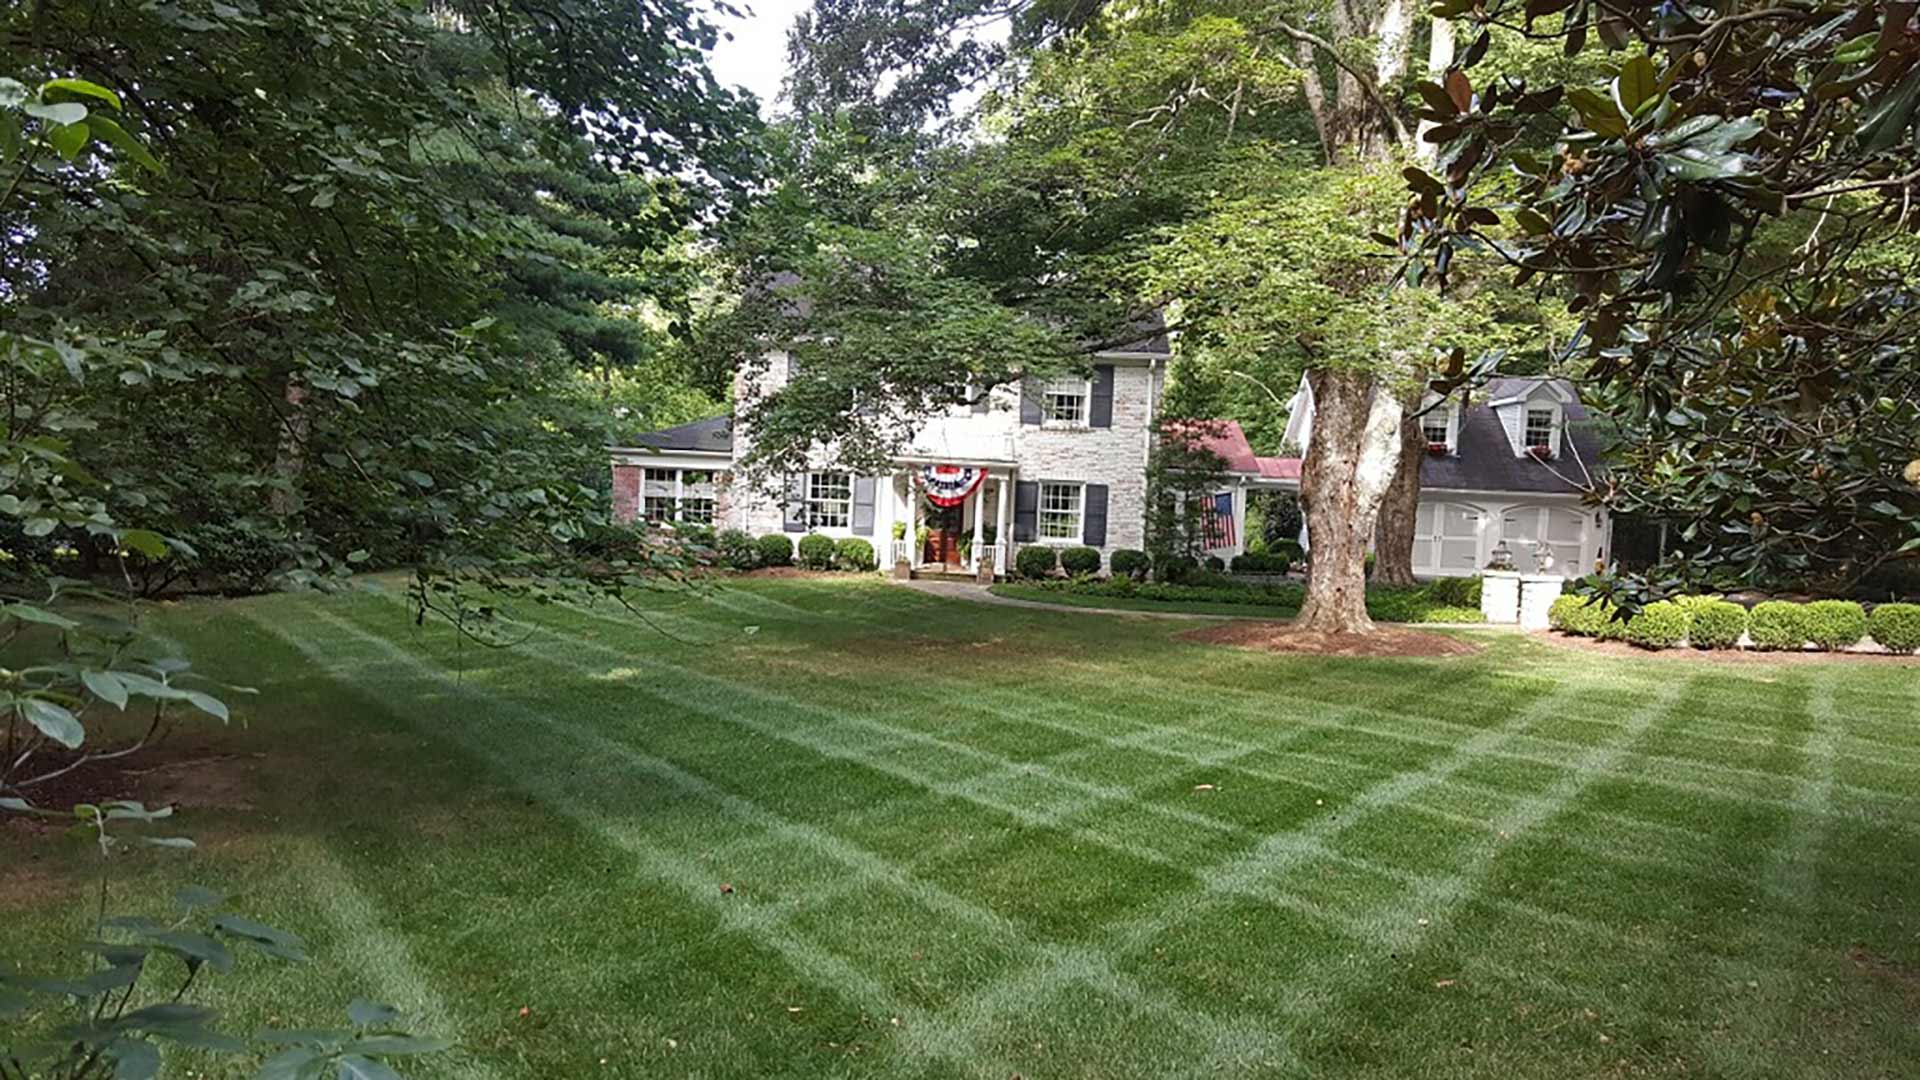 Mowed lawn with patterns added in Utica, IN.